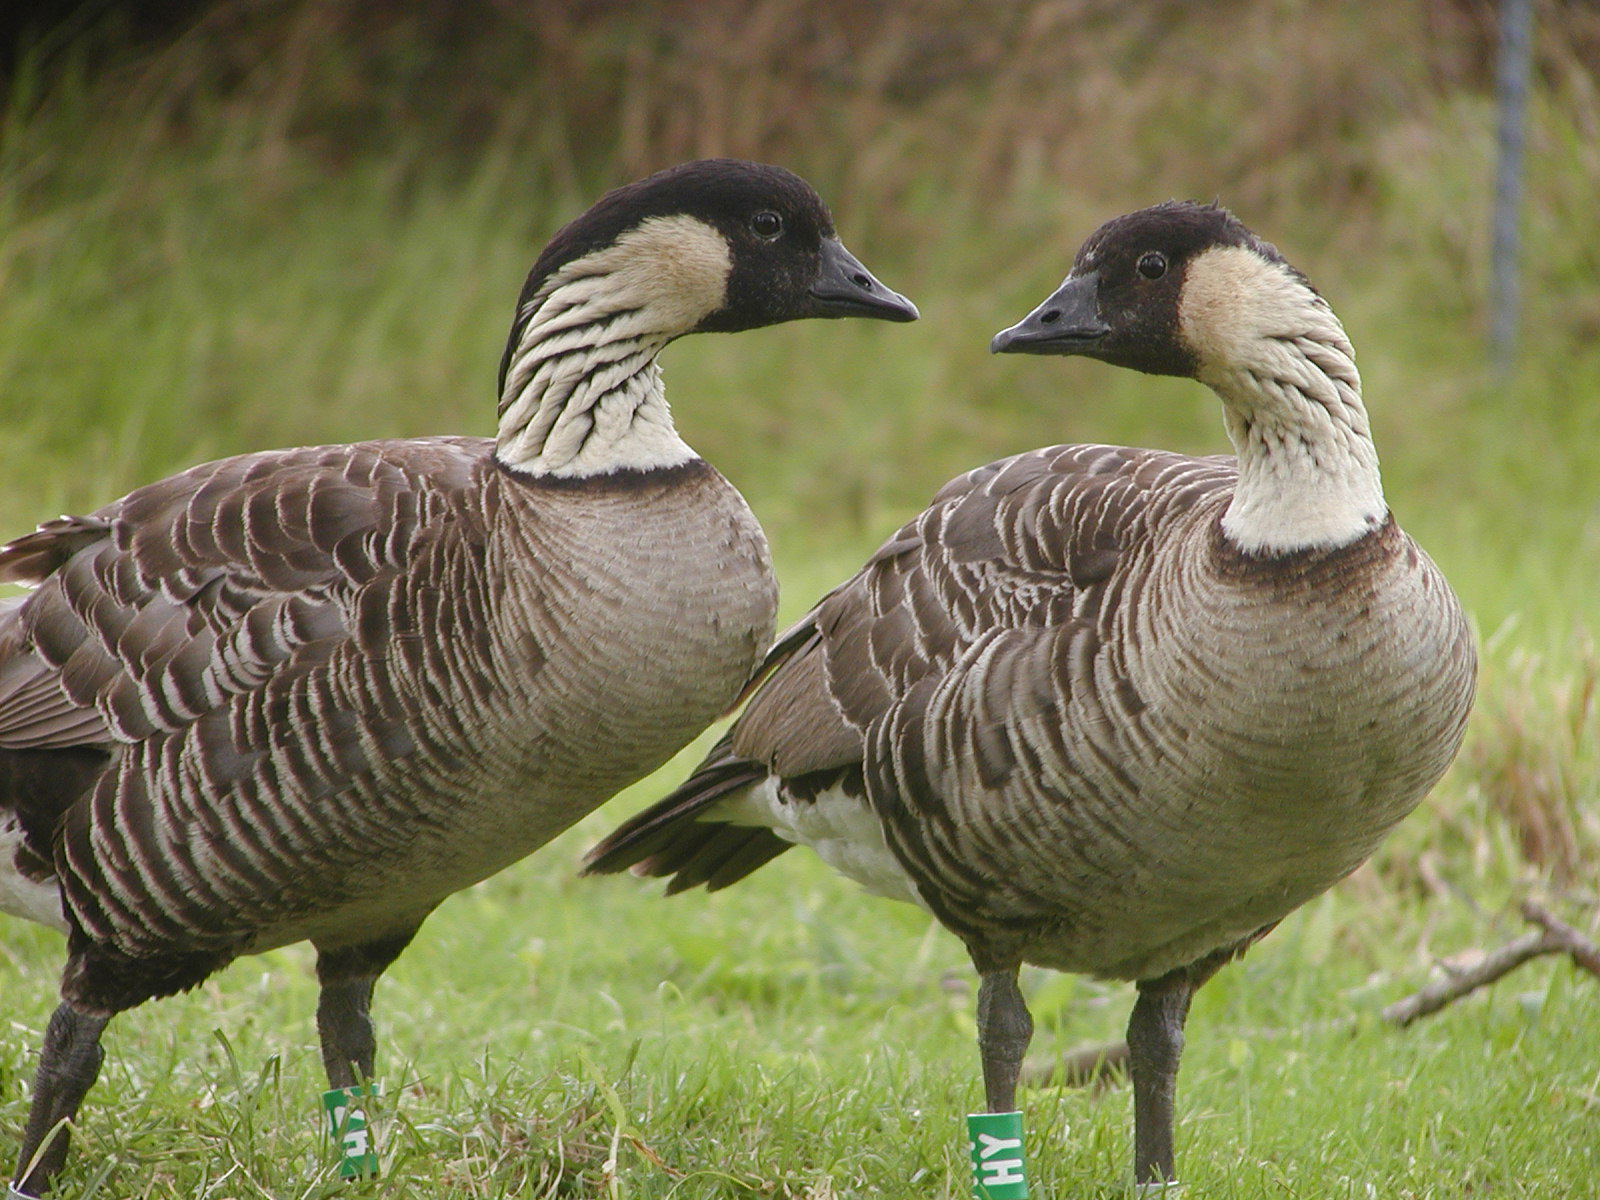 Pair of nēnē geese in front of green grass.